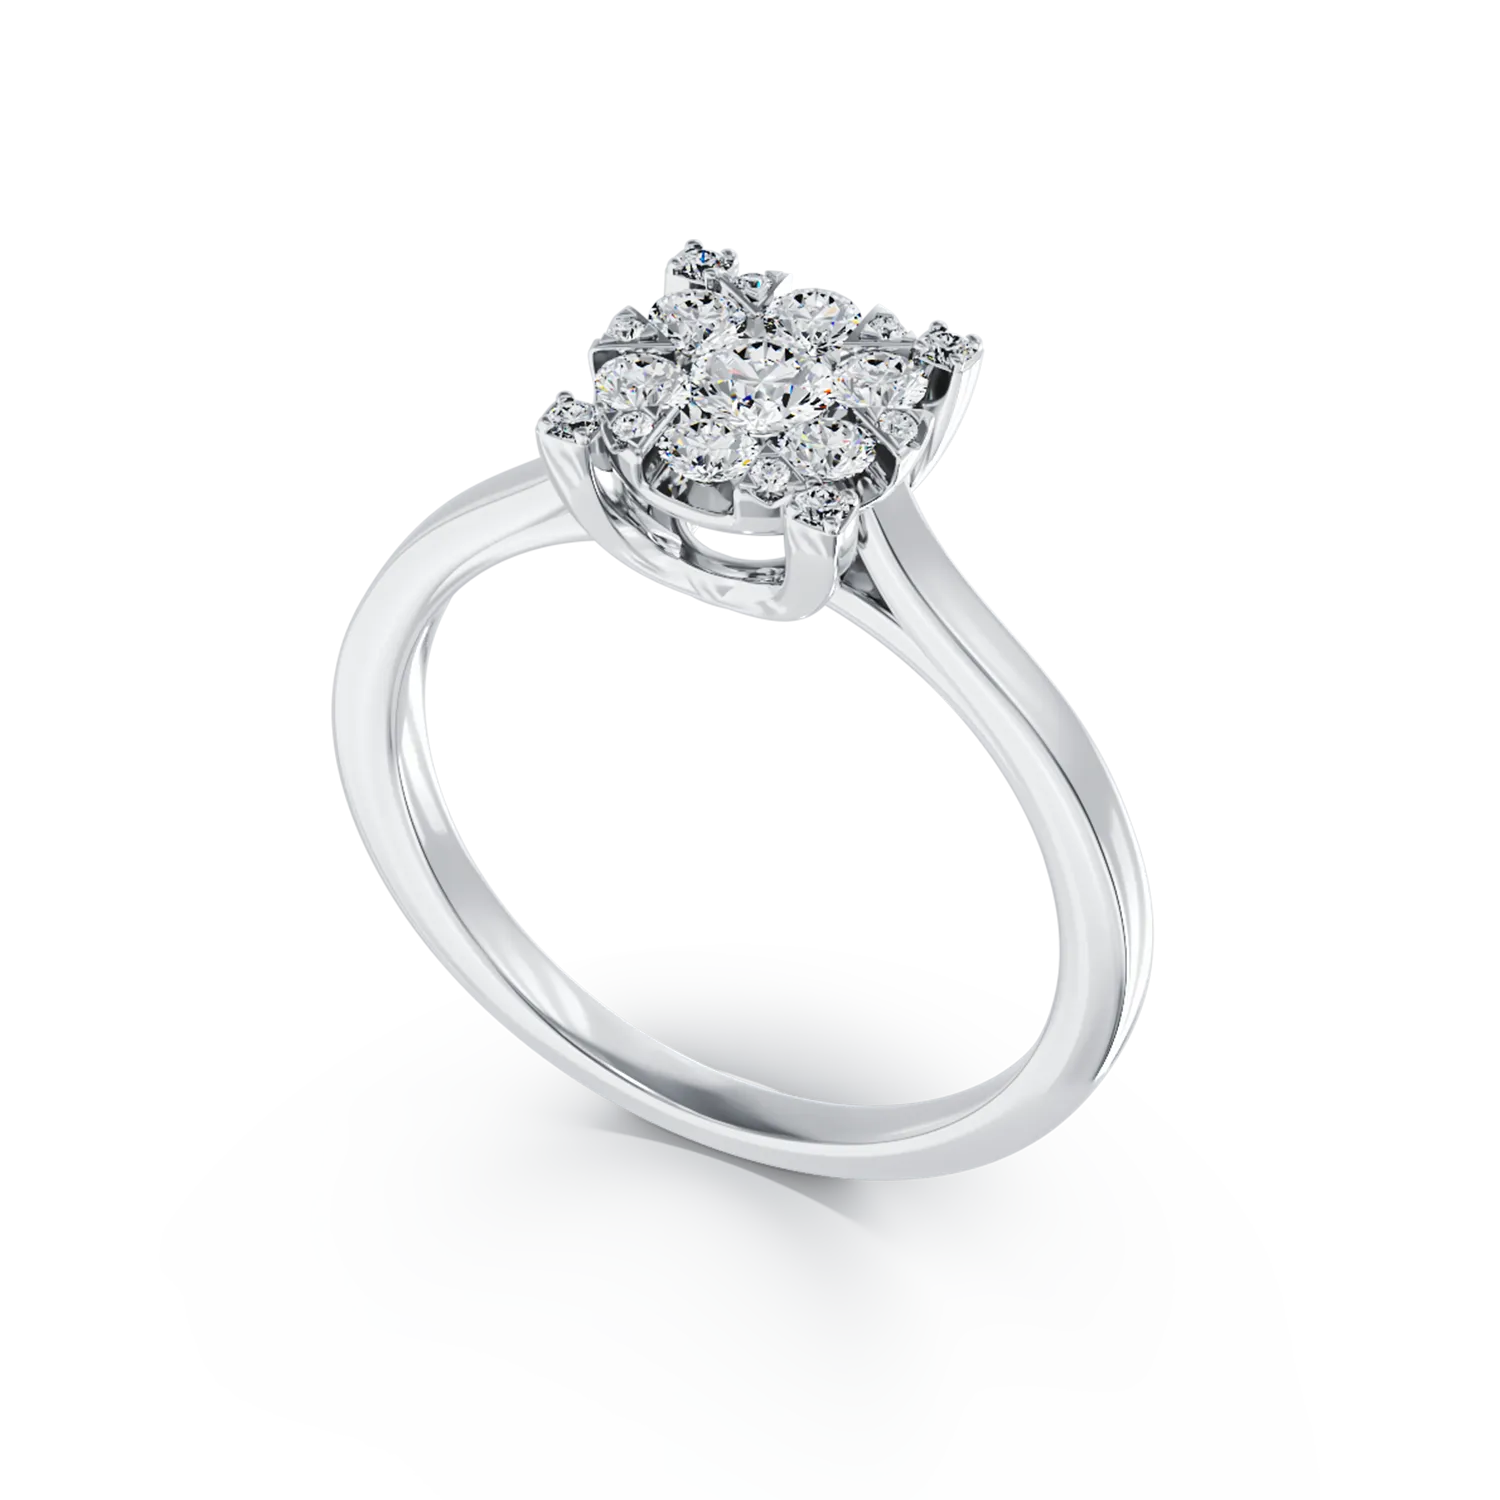 18K white gold engagement ring with diamonds of 0.34ct